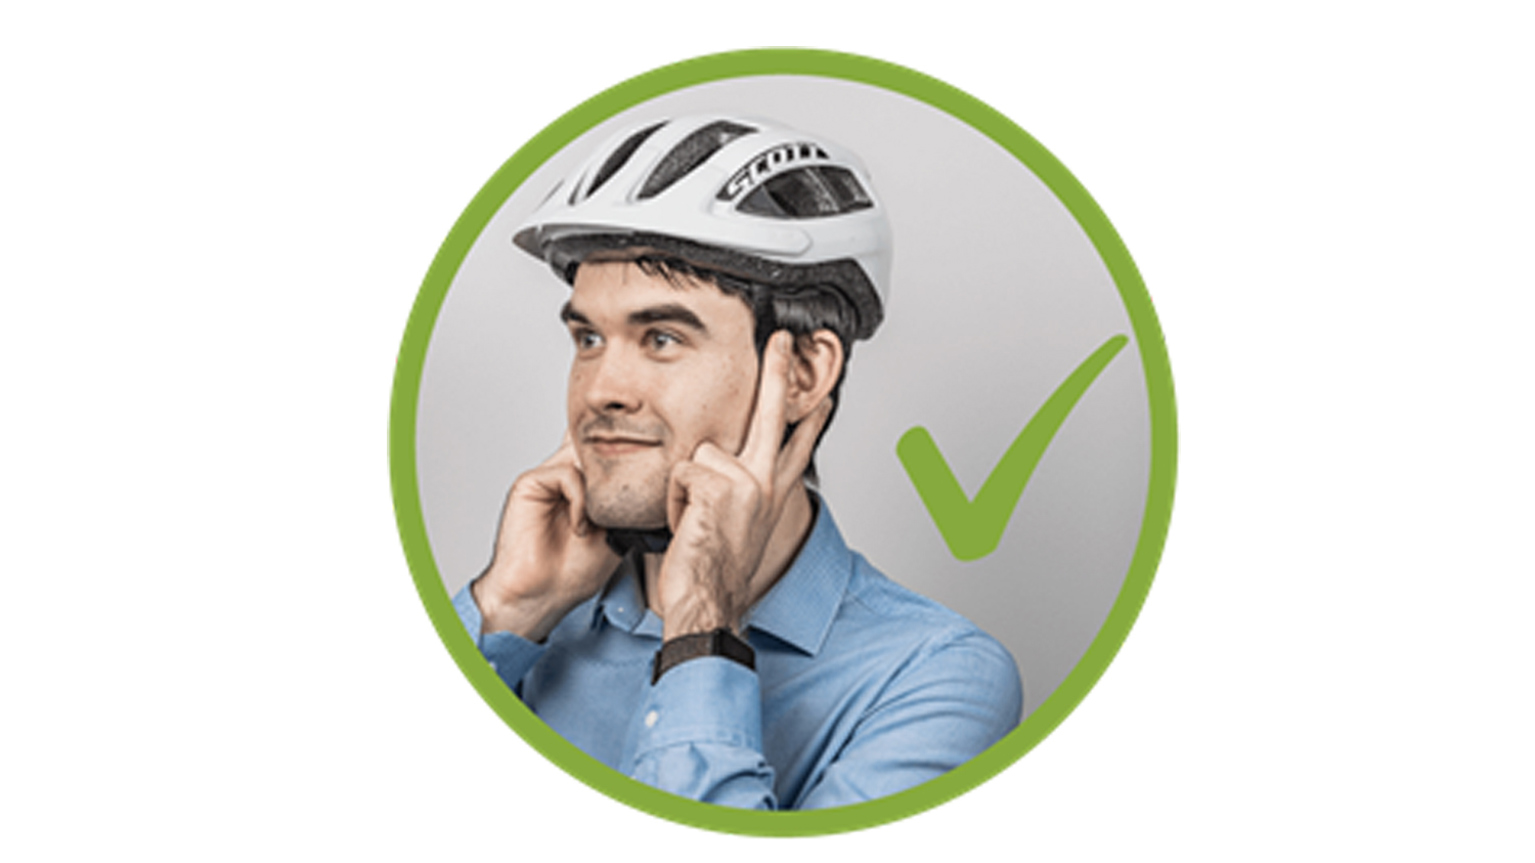 A man indicates how the helmet should fit by placing two fingers under each ear.